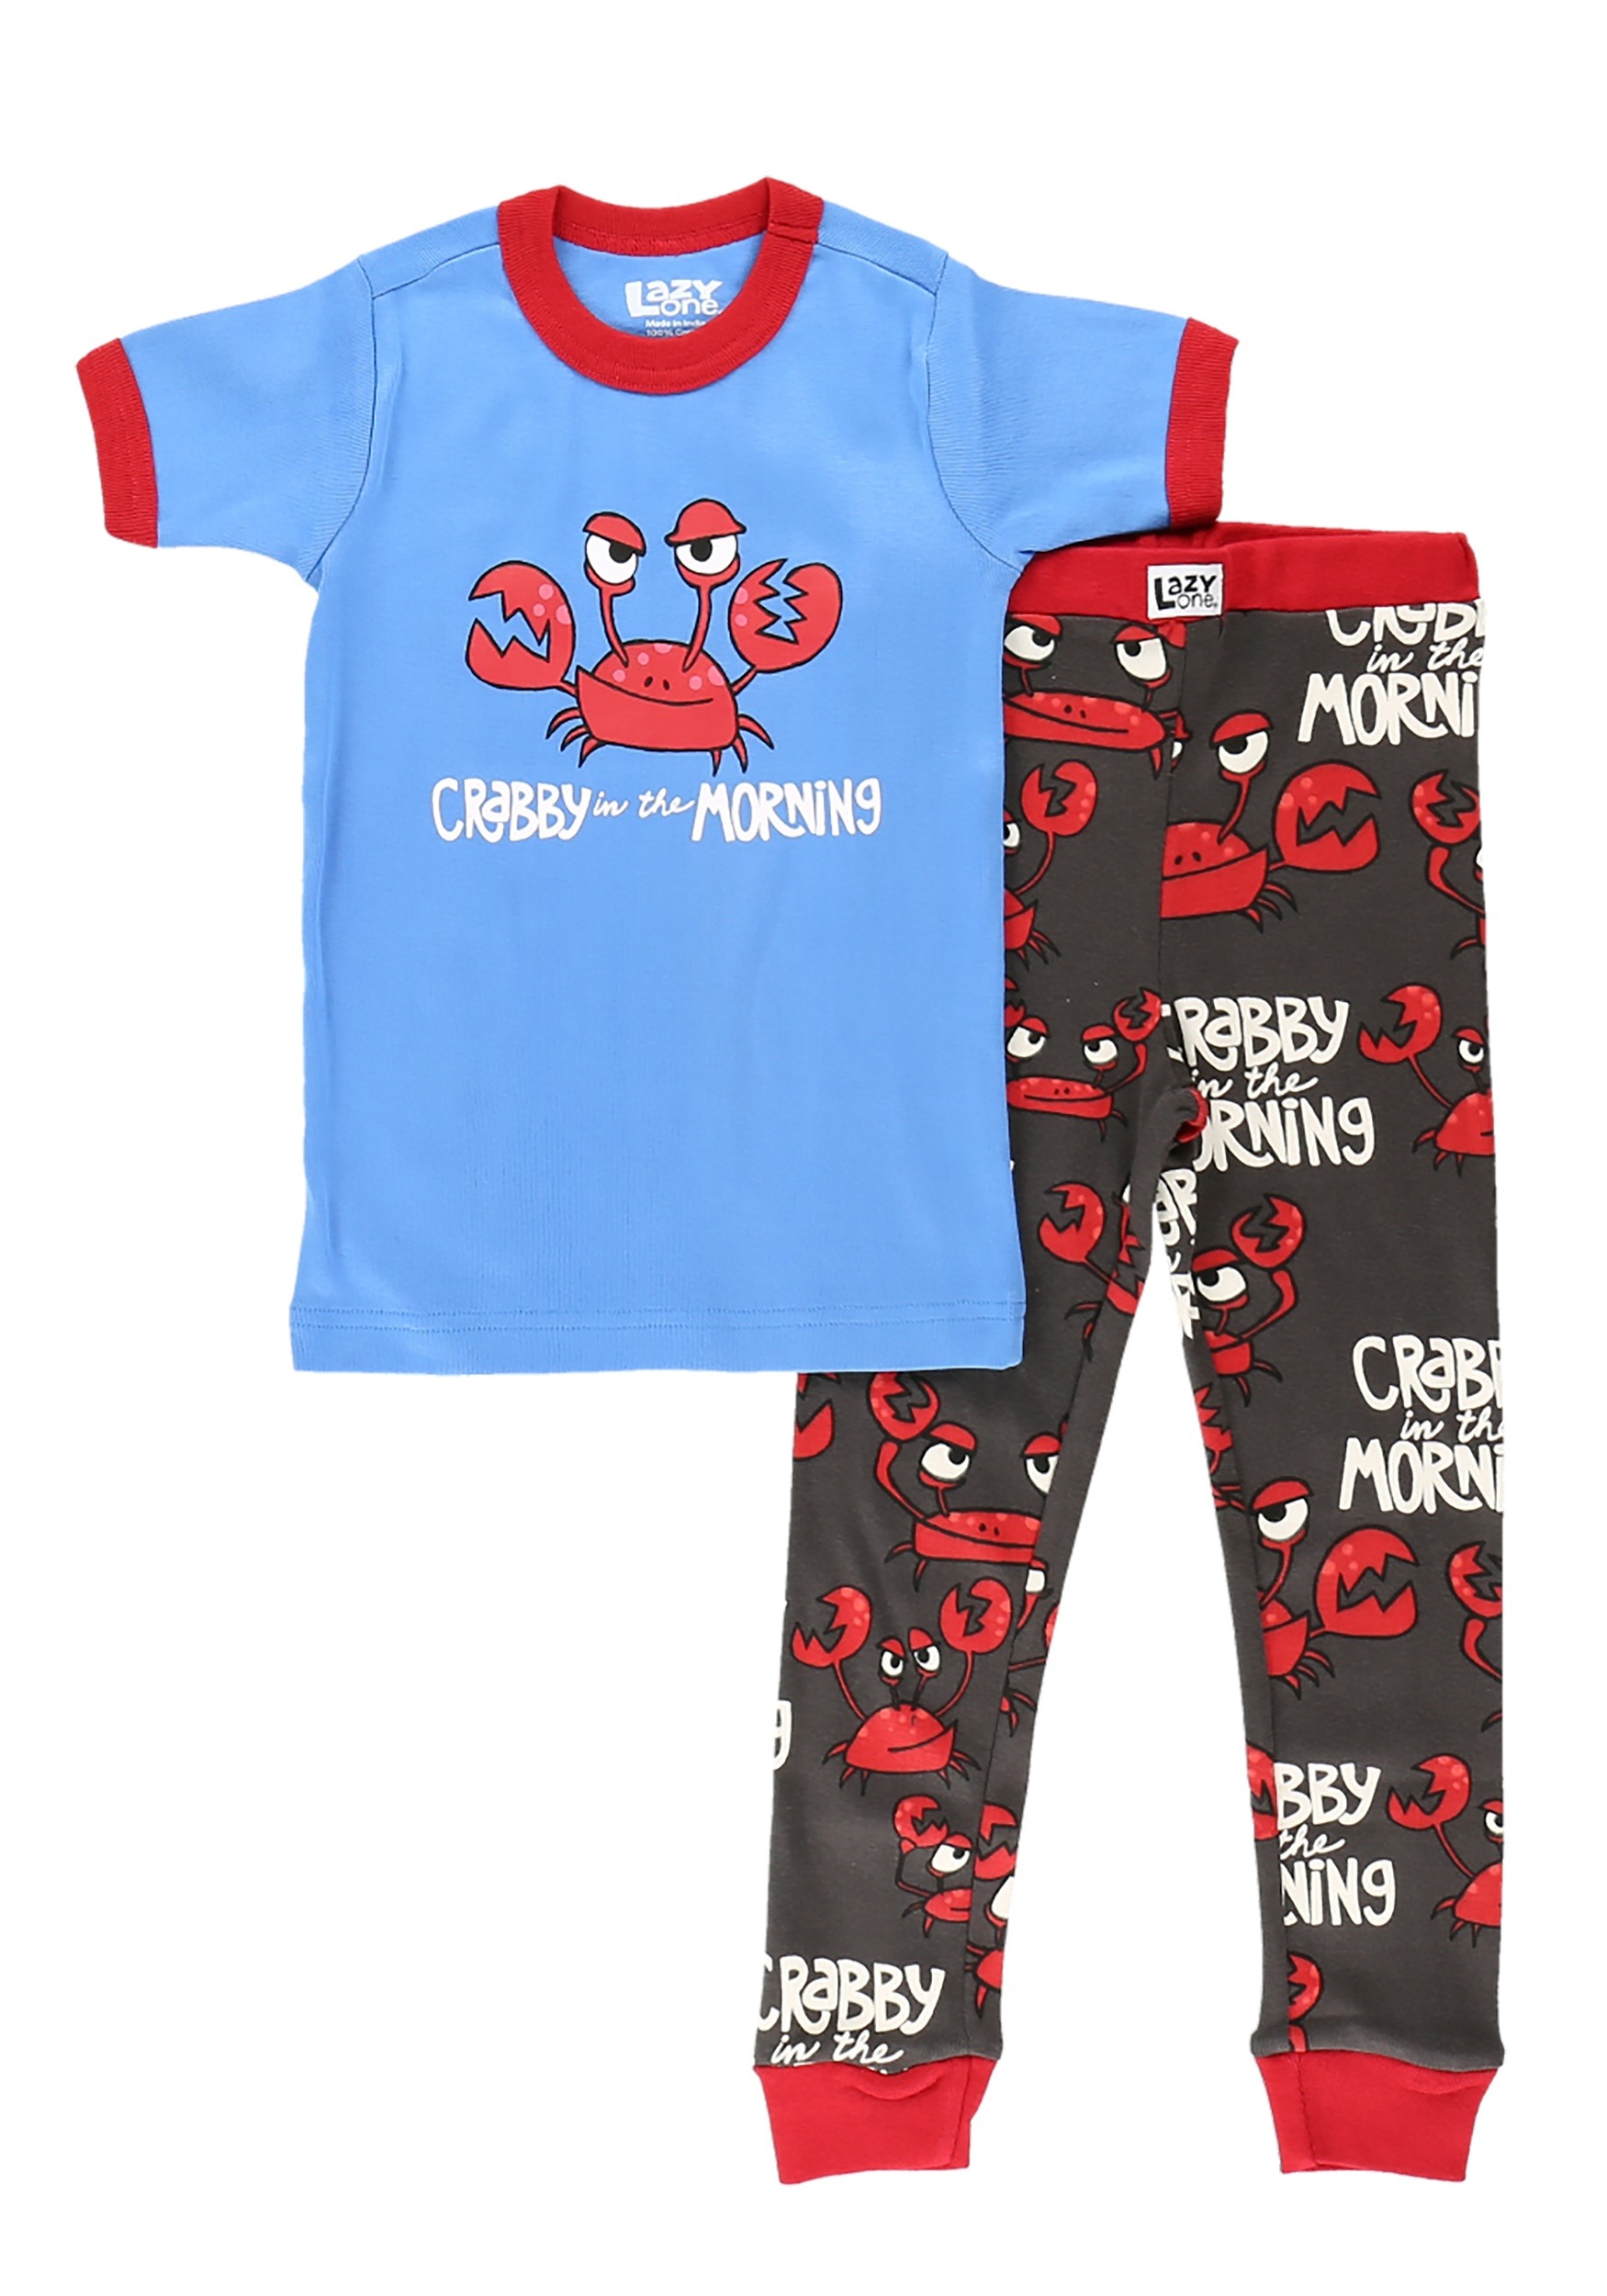 Crabby in the Morning Short Sleeve Pajama Set for Kids